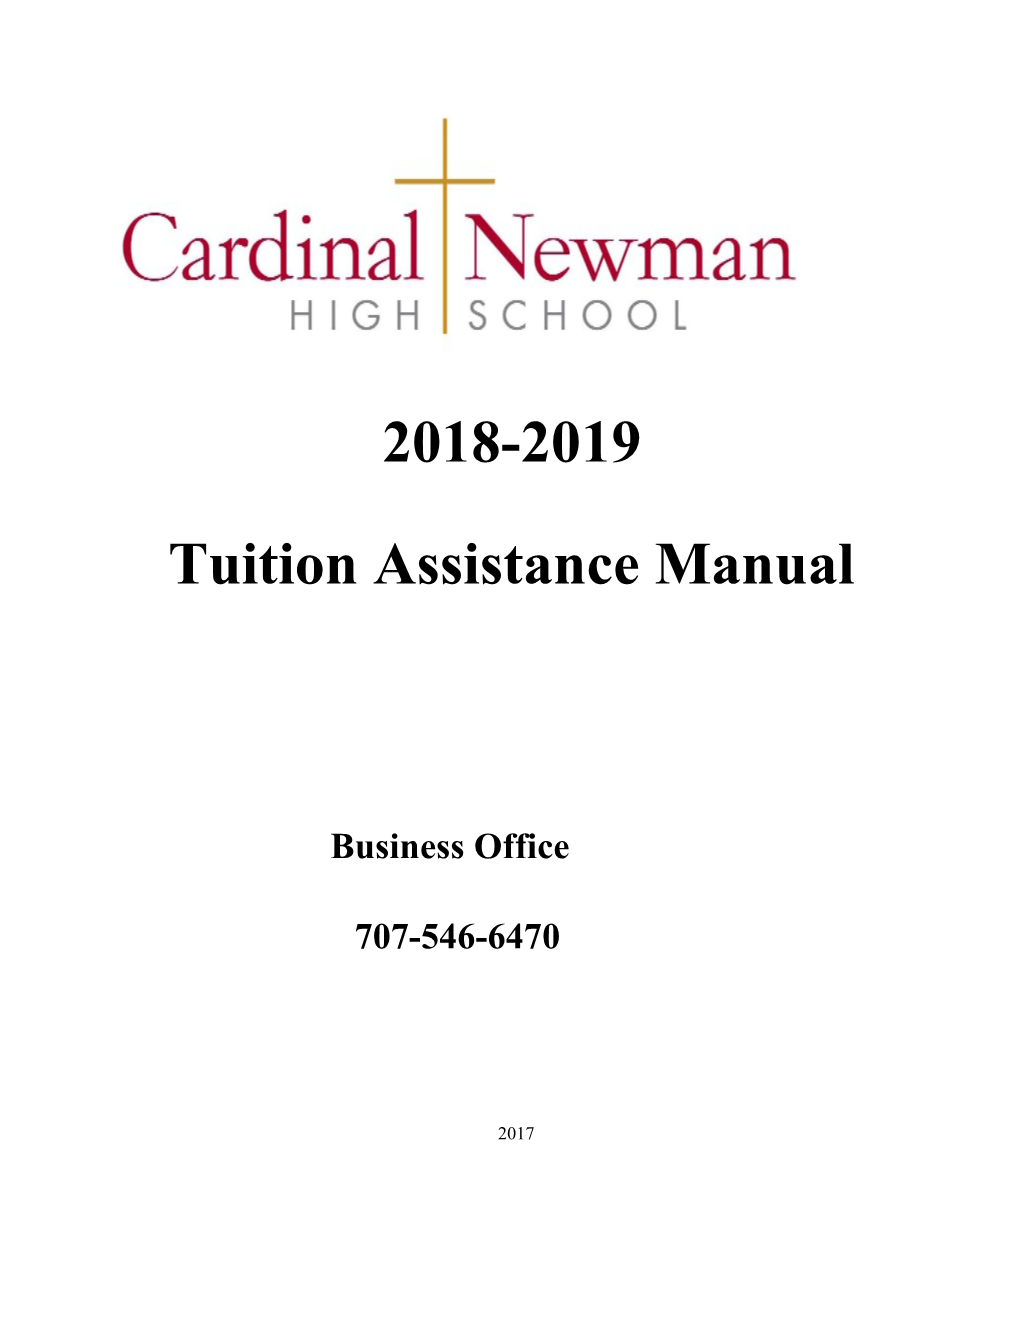 Tuition Assistance Manual